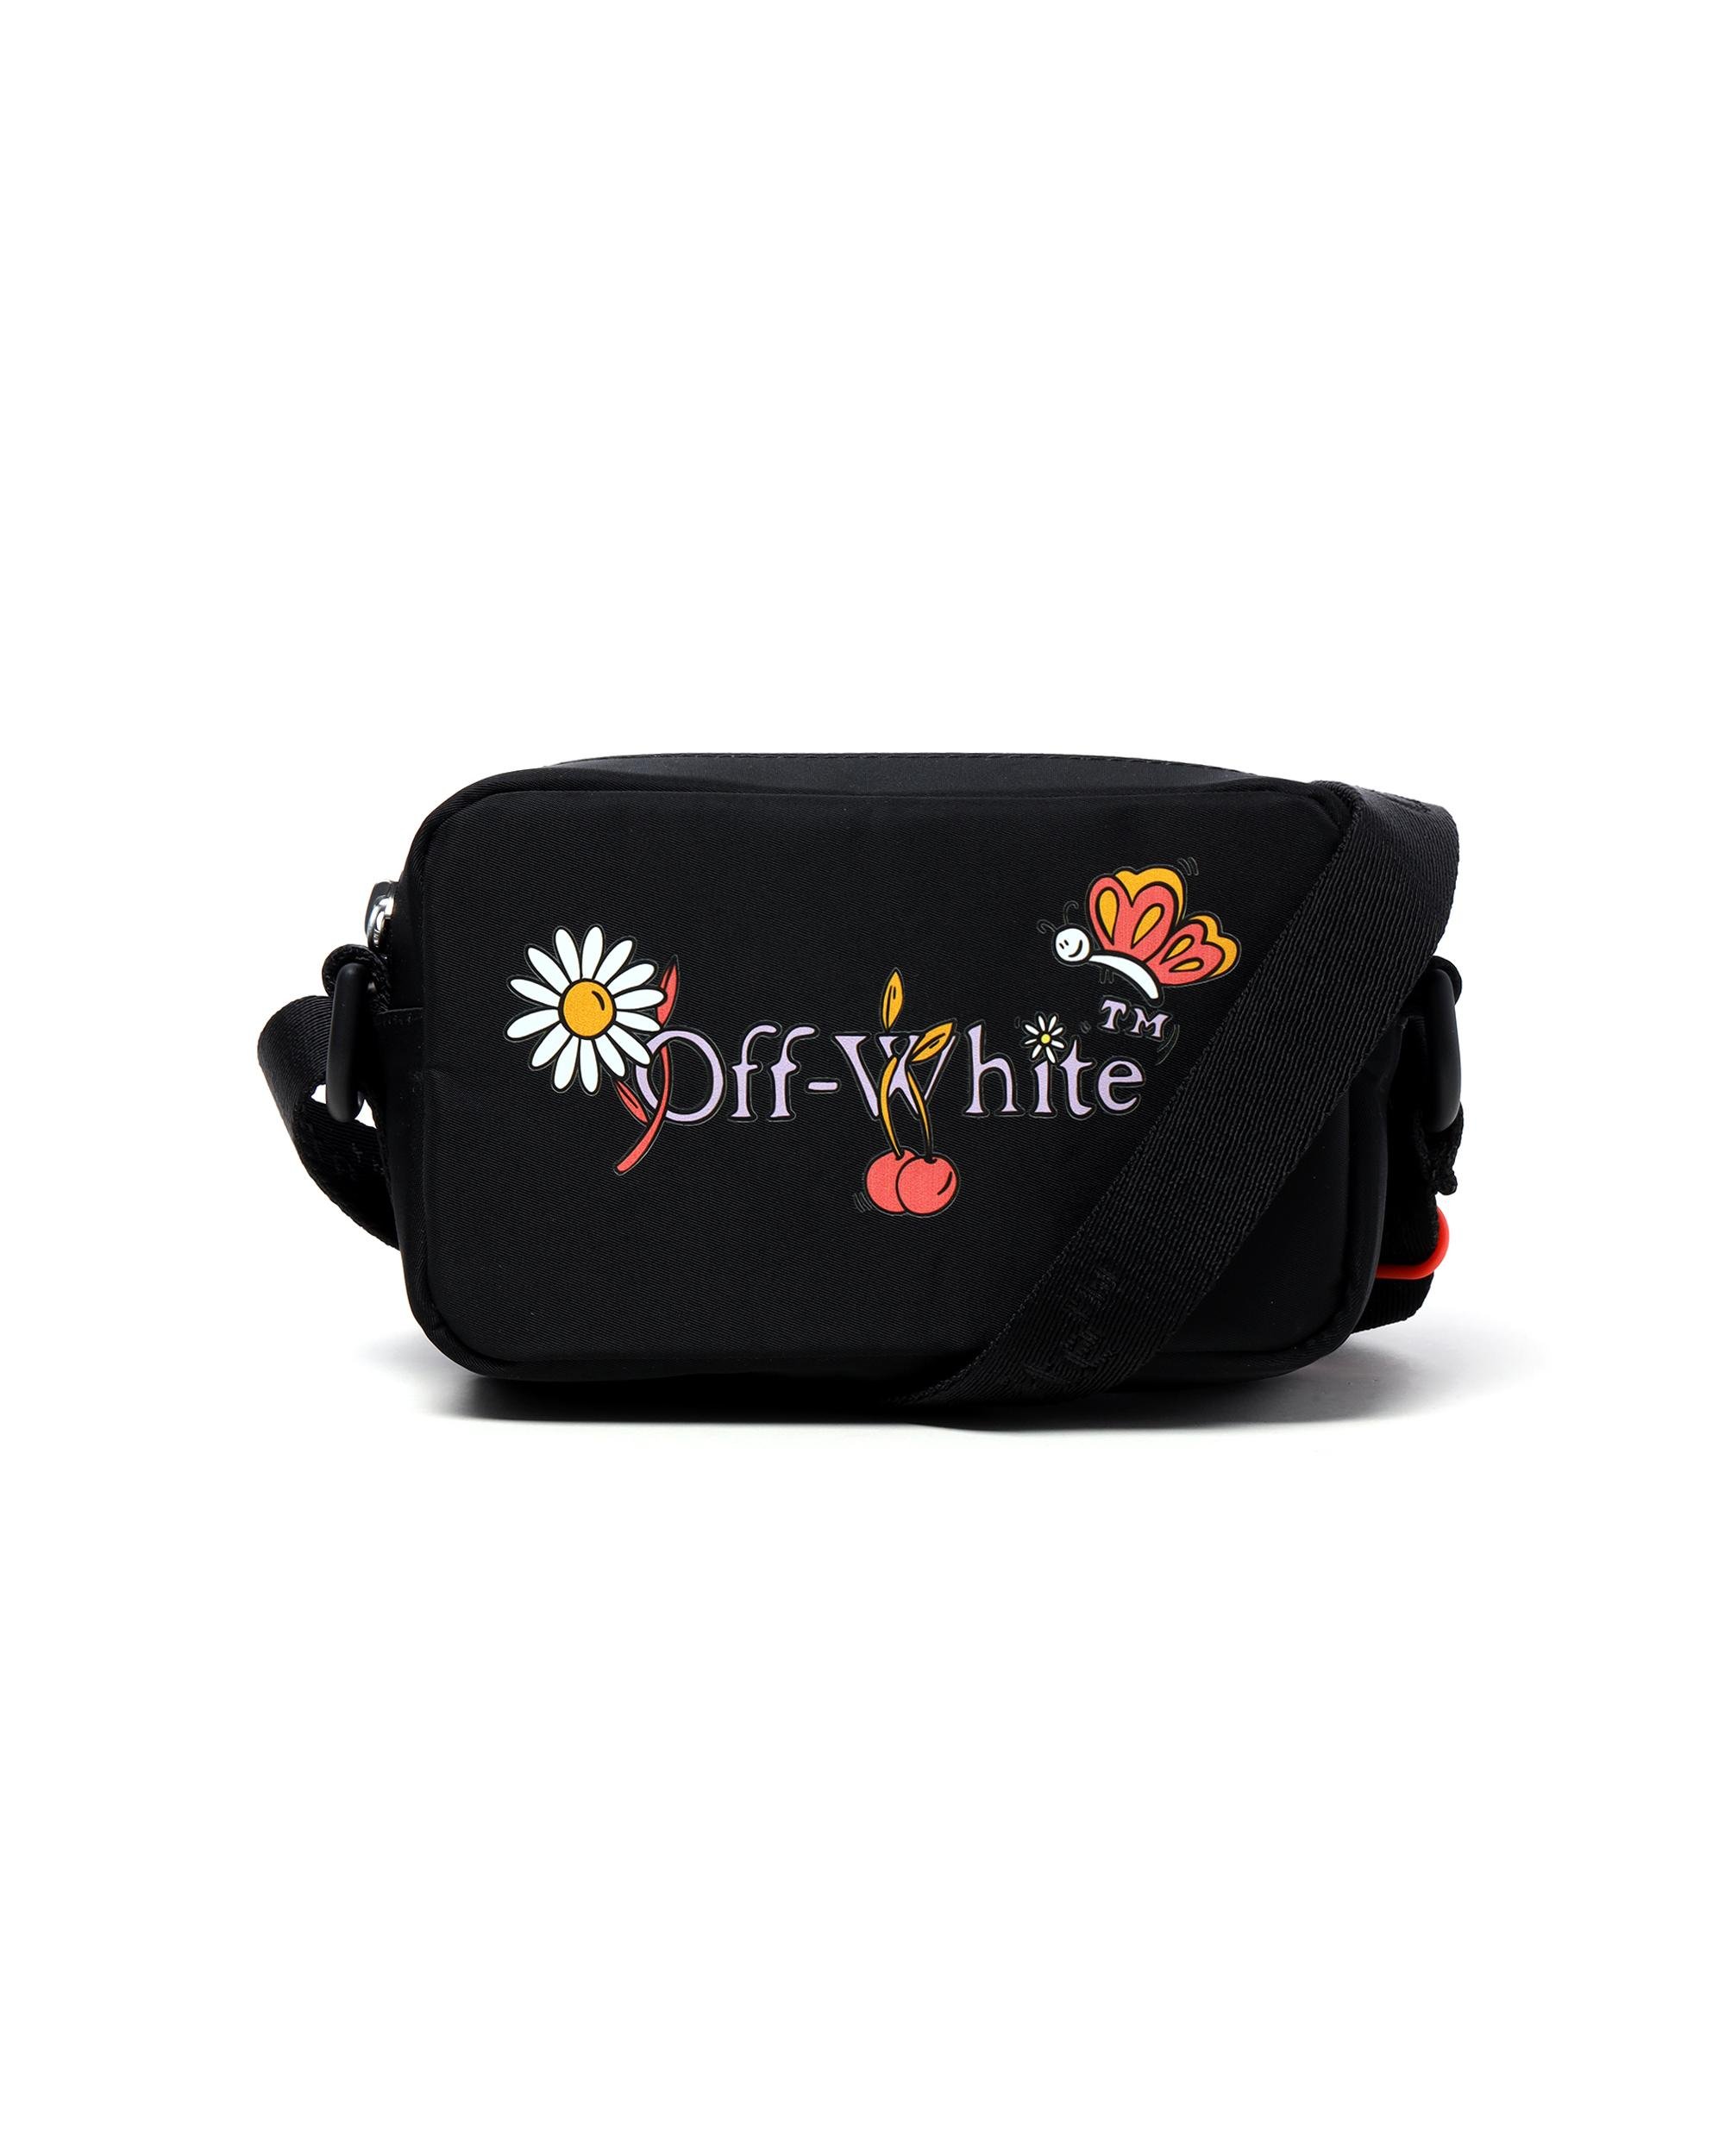 Kids funny flowers camera bag by OFF-WHITE